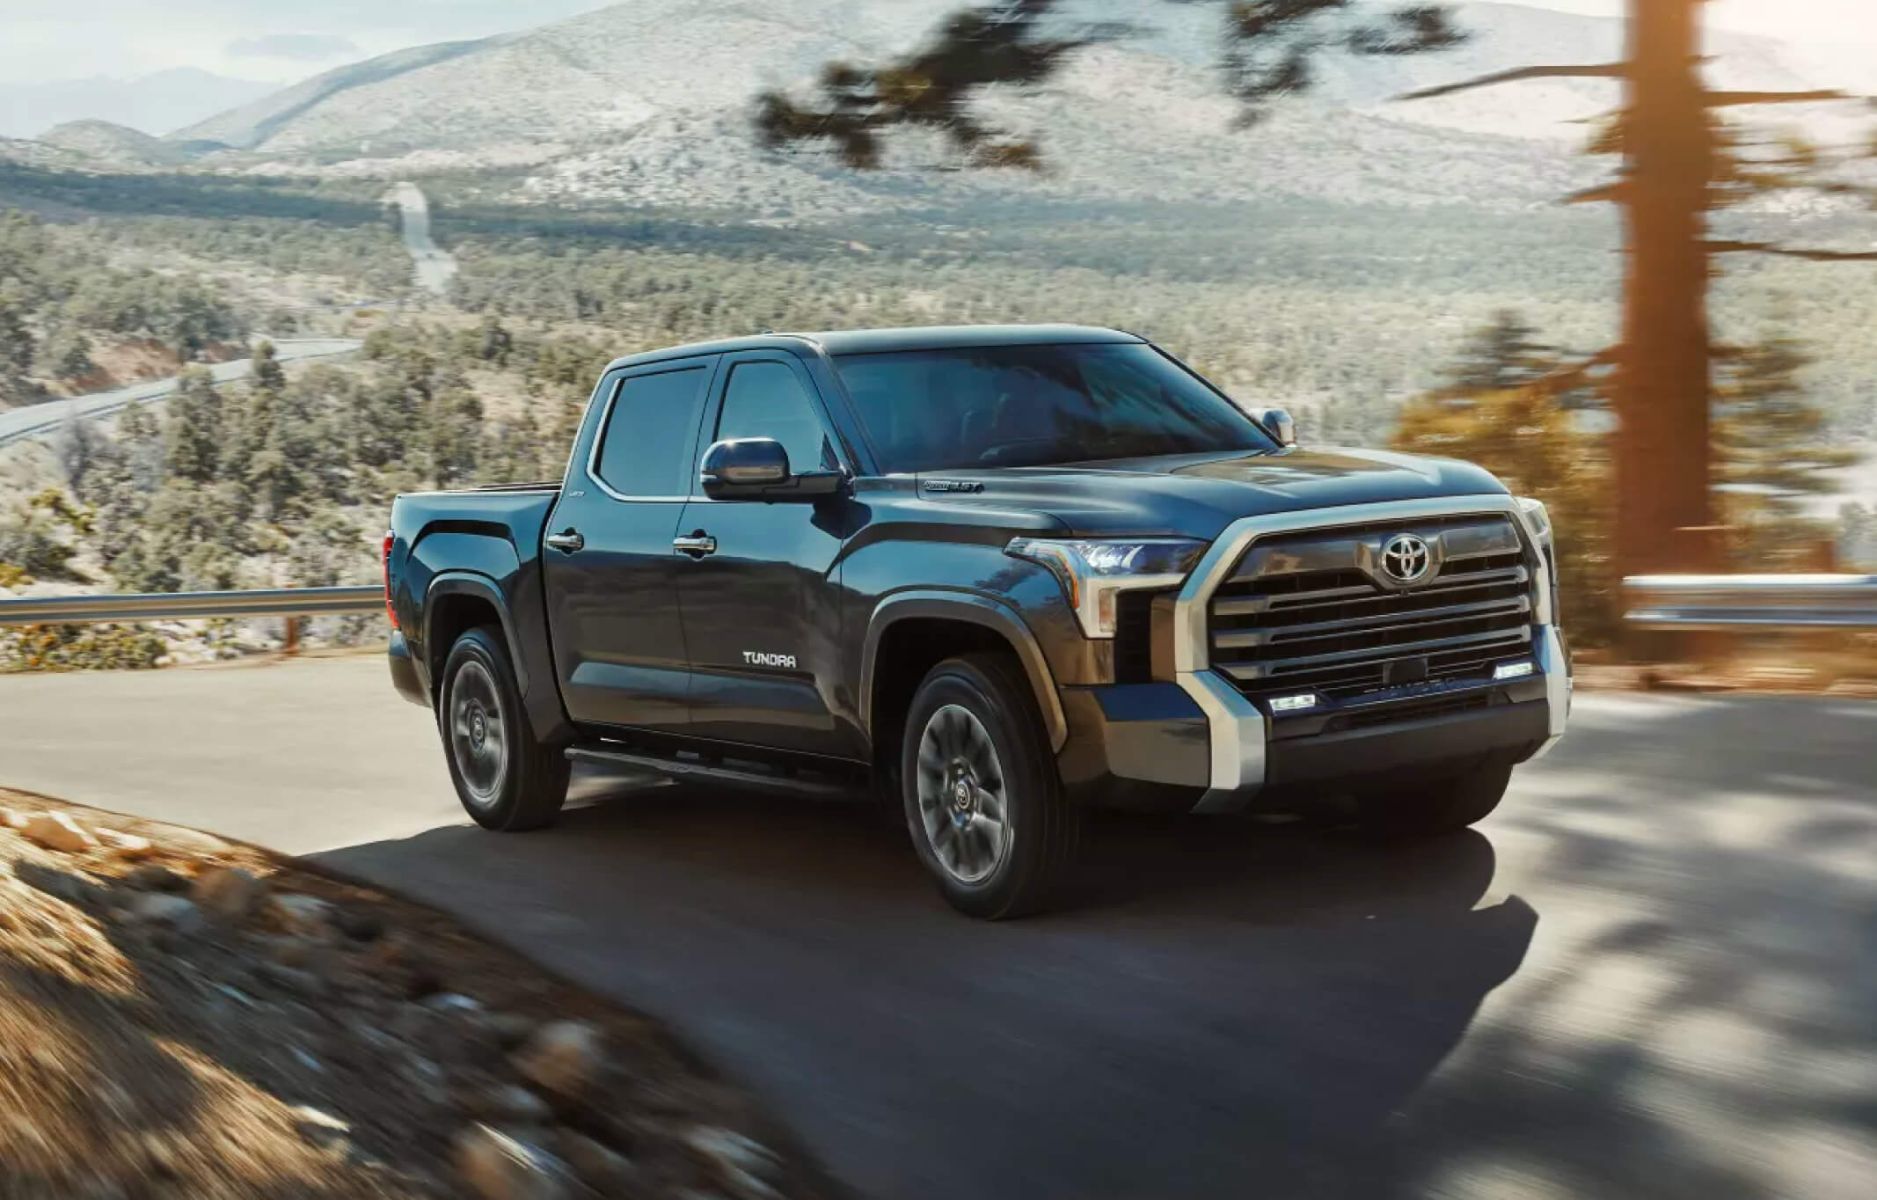 2022 Toyota Tundra In Georgetown: The Truck Built For Work, Play, And Everything In Between